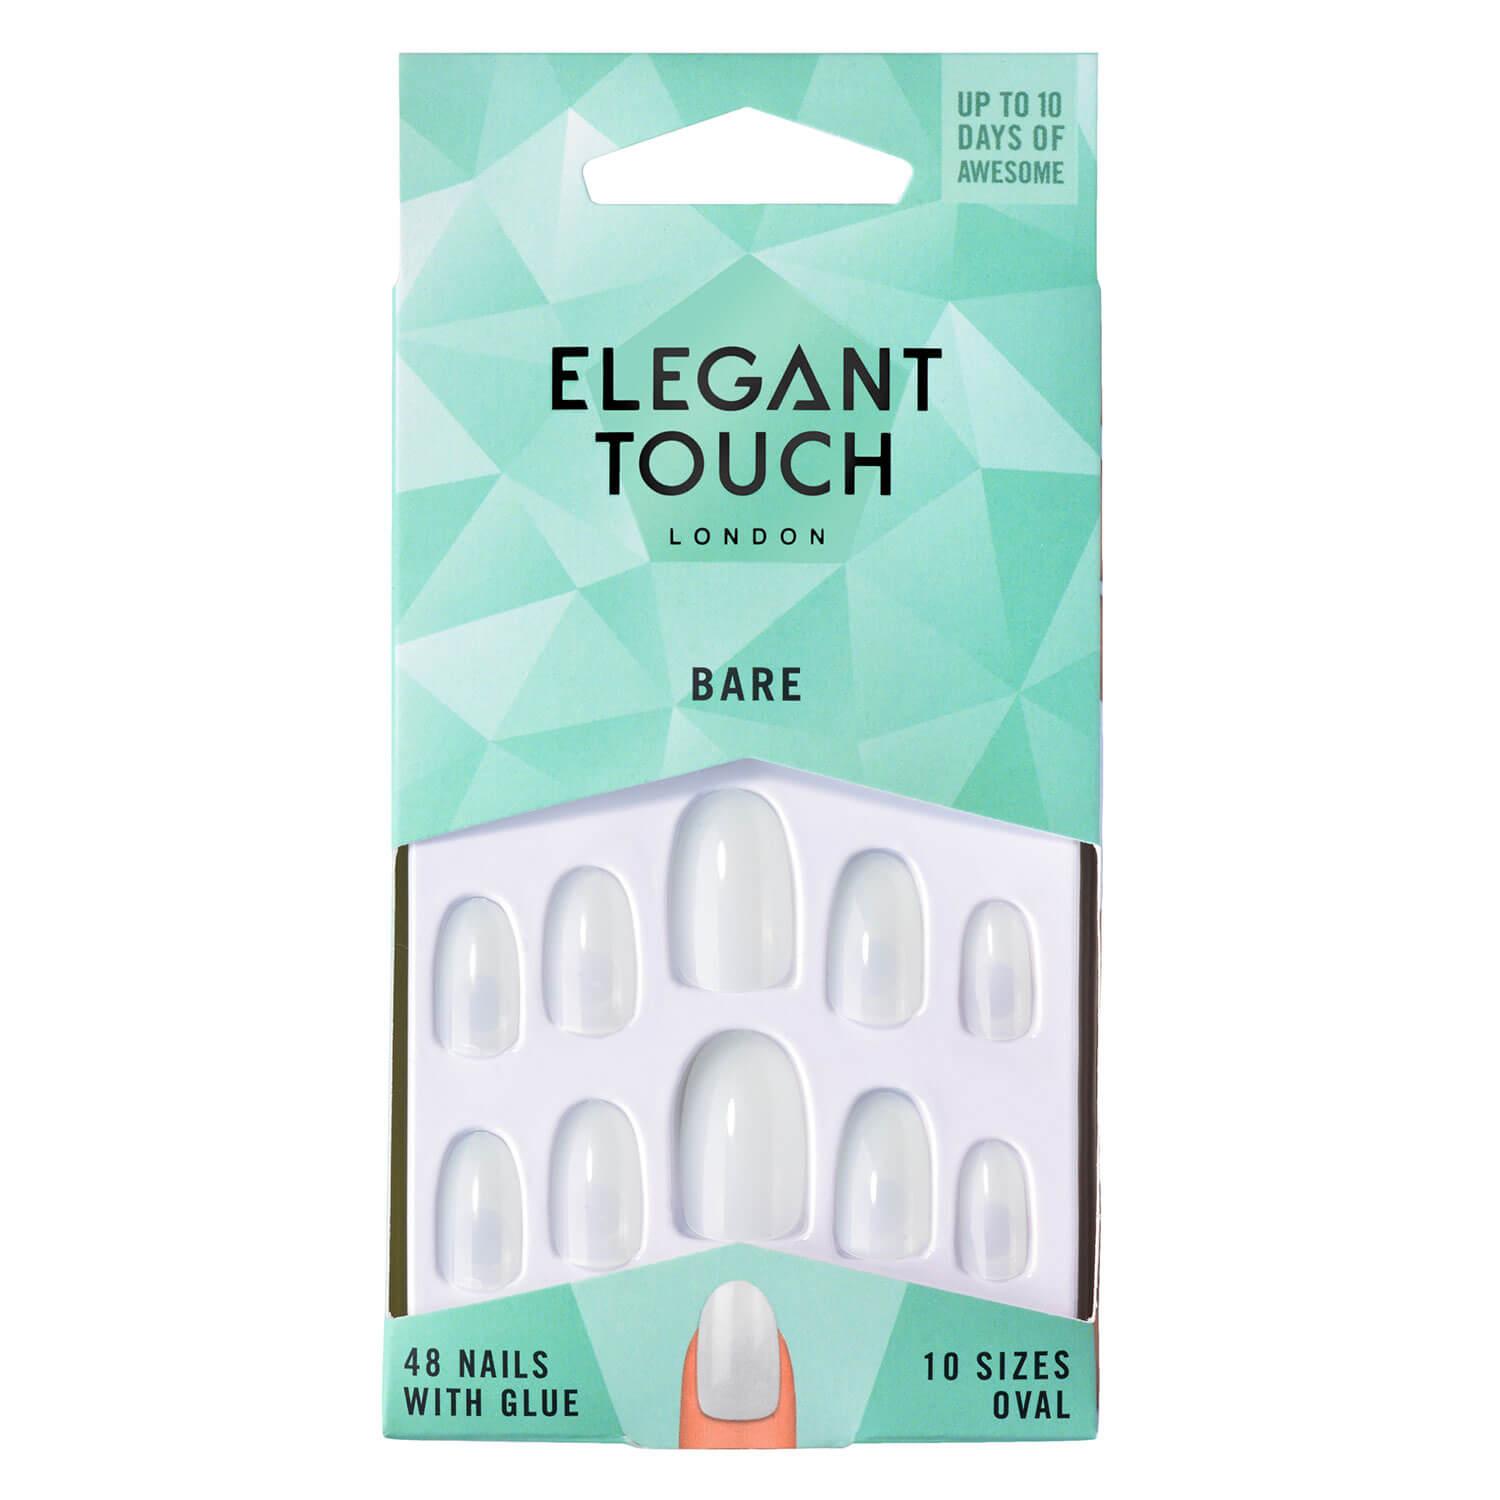 Elegant Touch - Bare Nails Oval